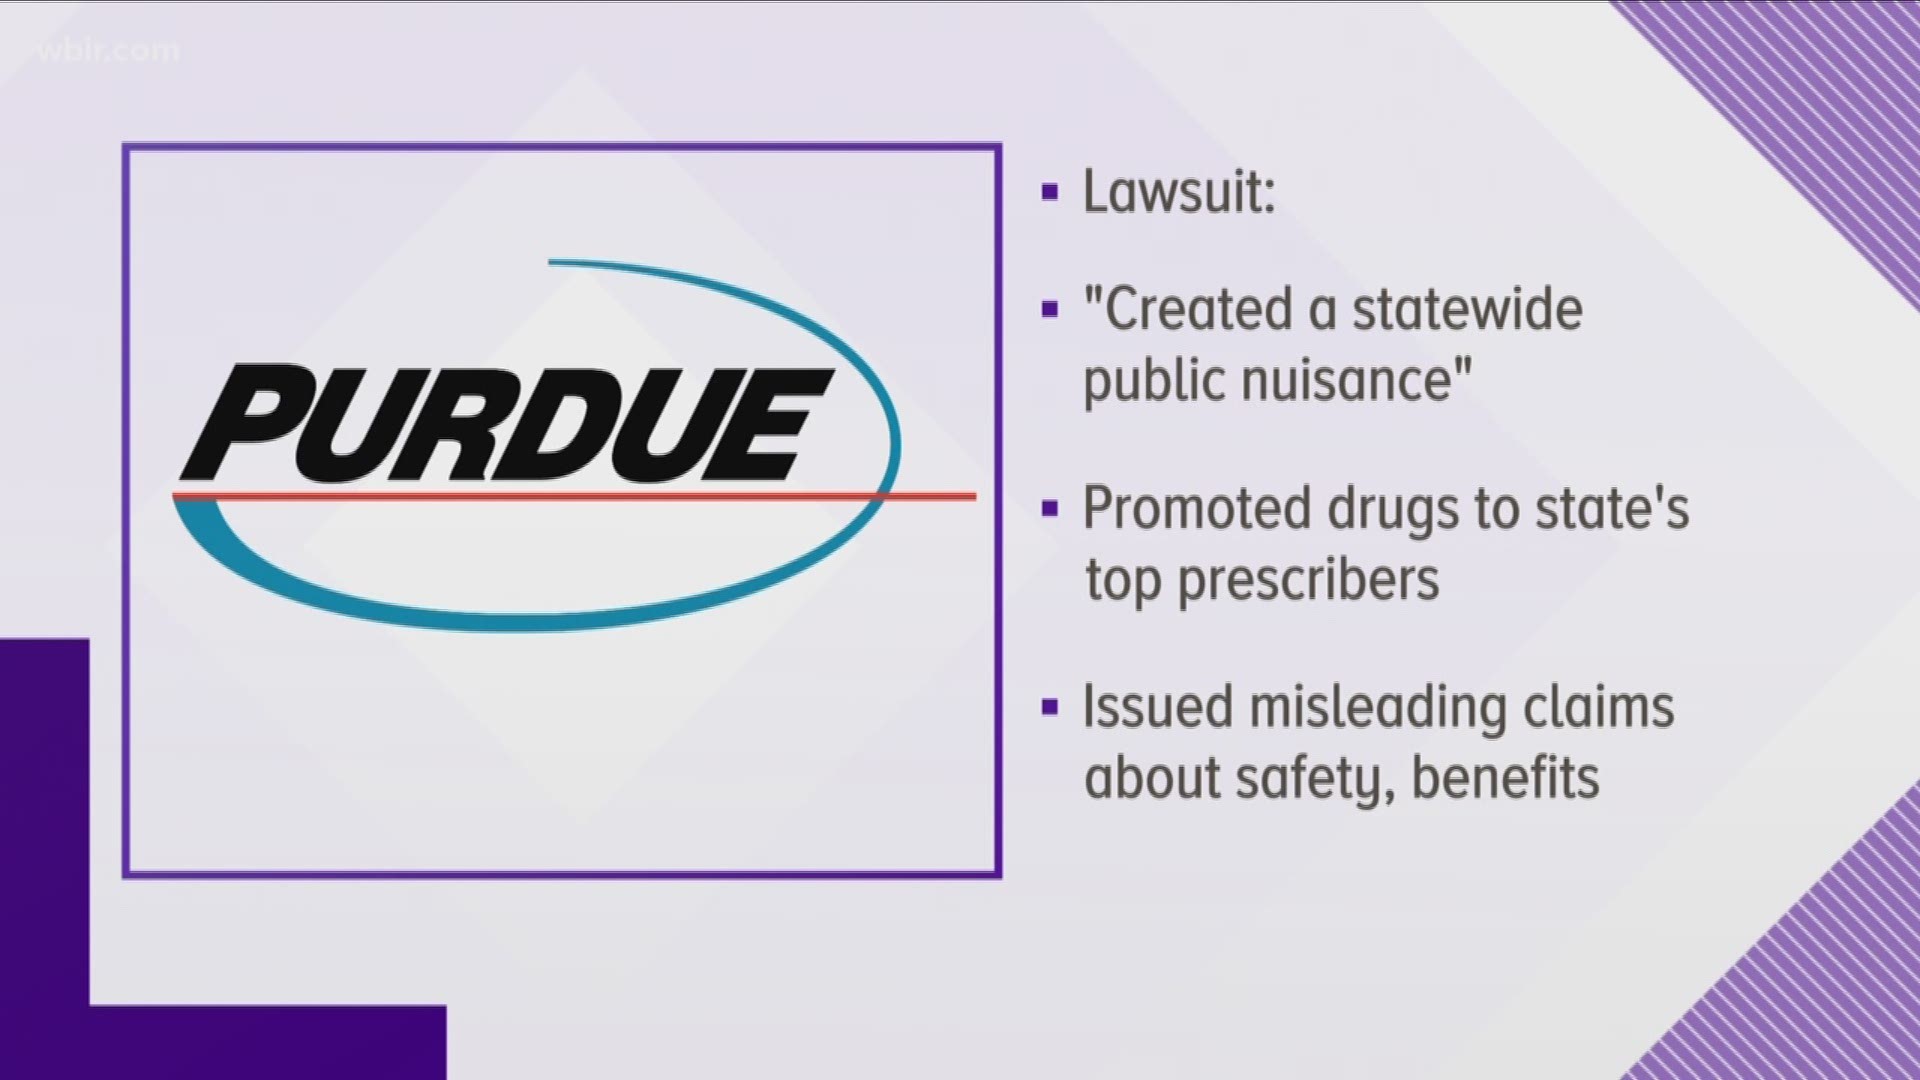 AG Herbert Slatery alleges Purdue Pharma made misleading claims about the safety of its drugs and engaged in "highly aggressive" sales practices.